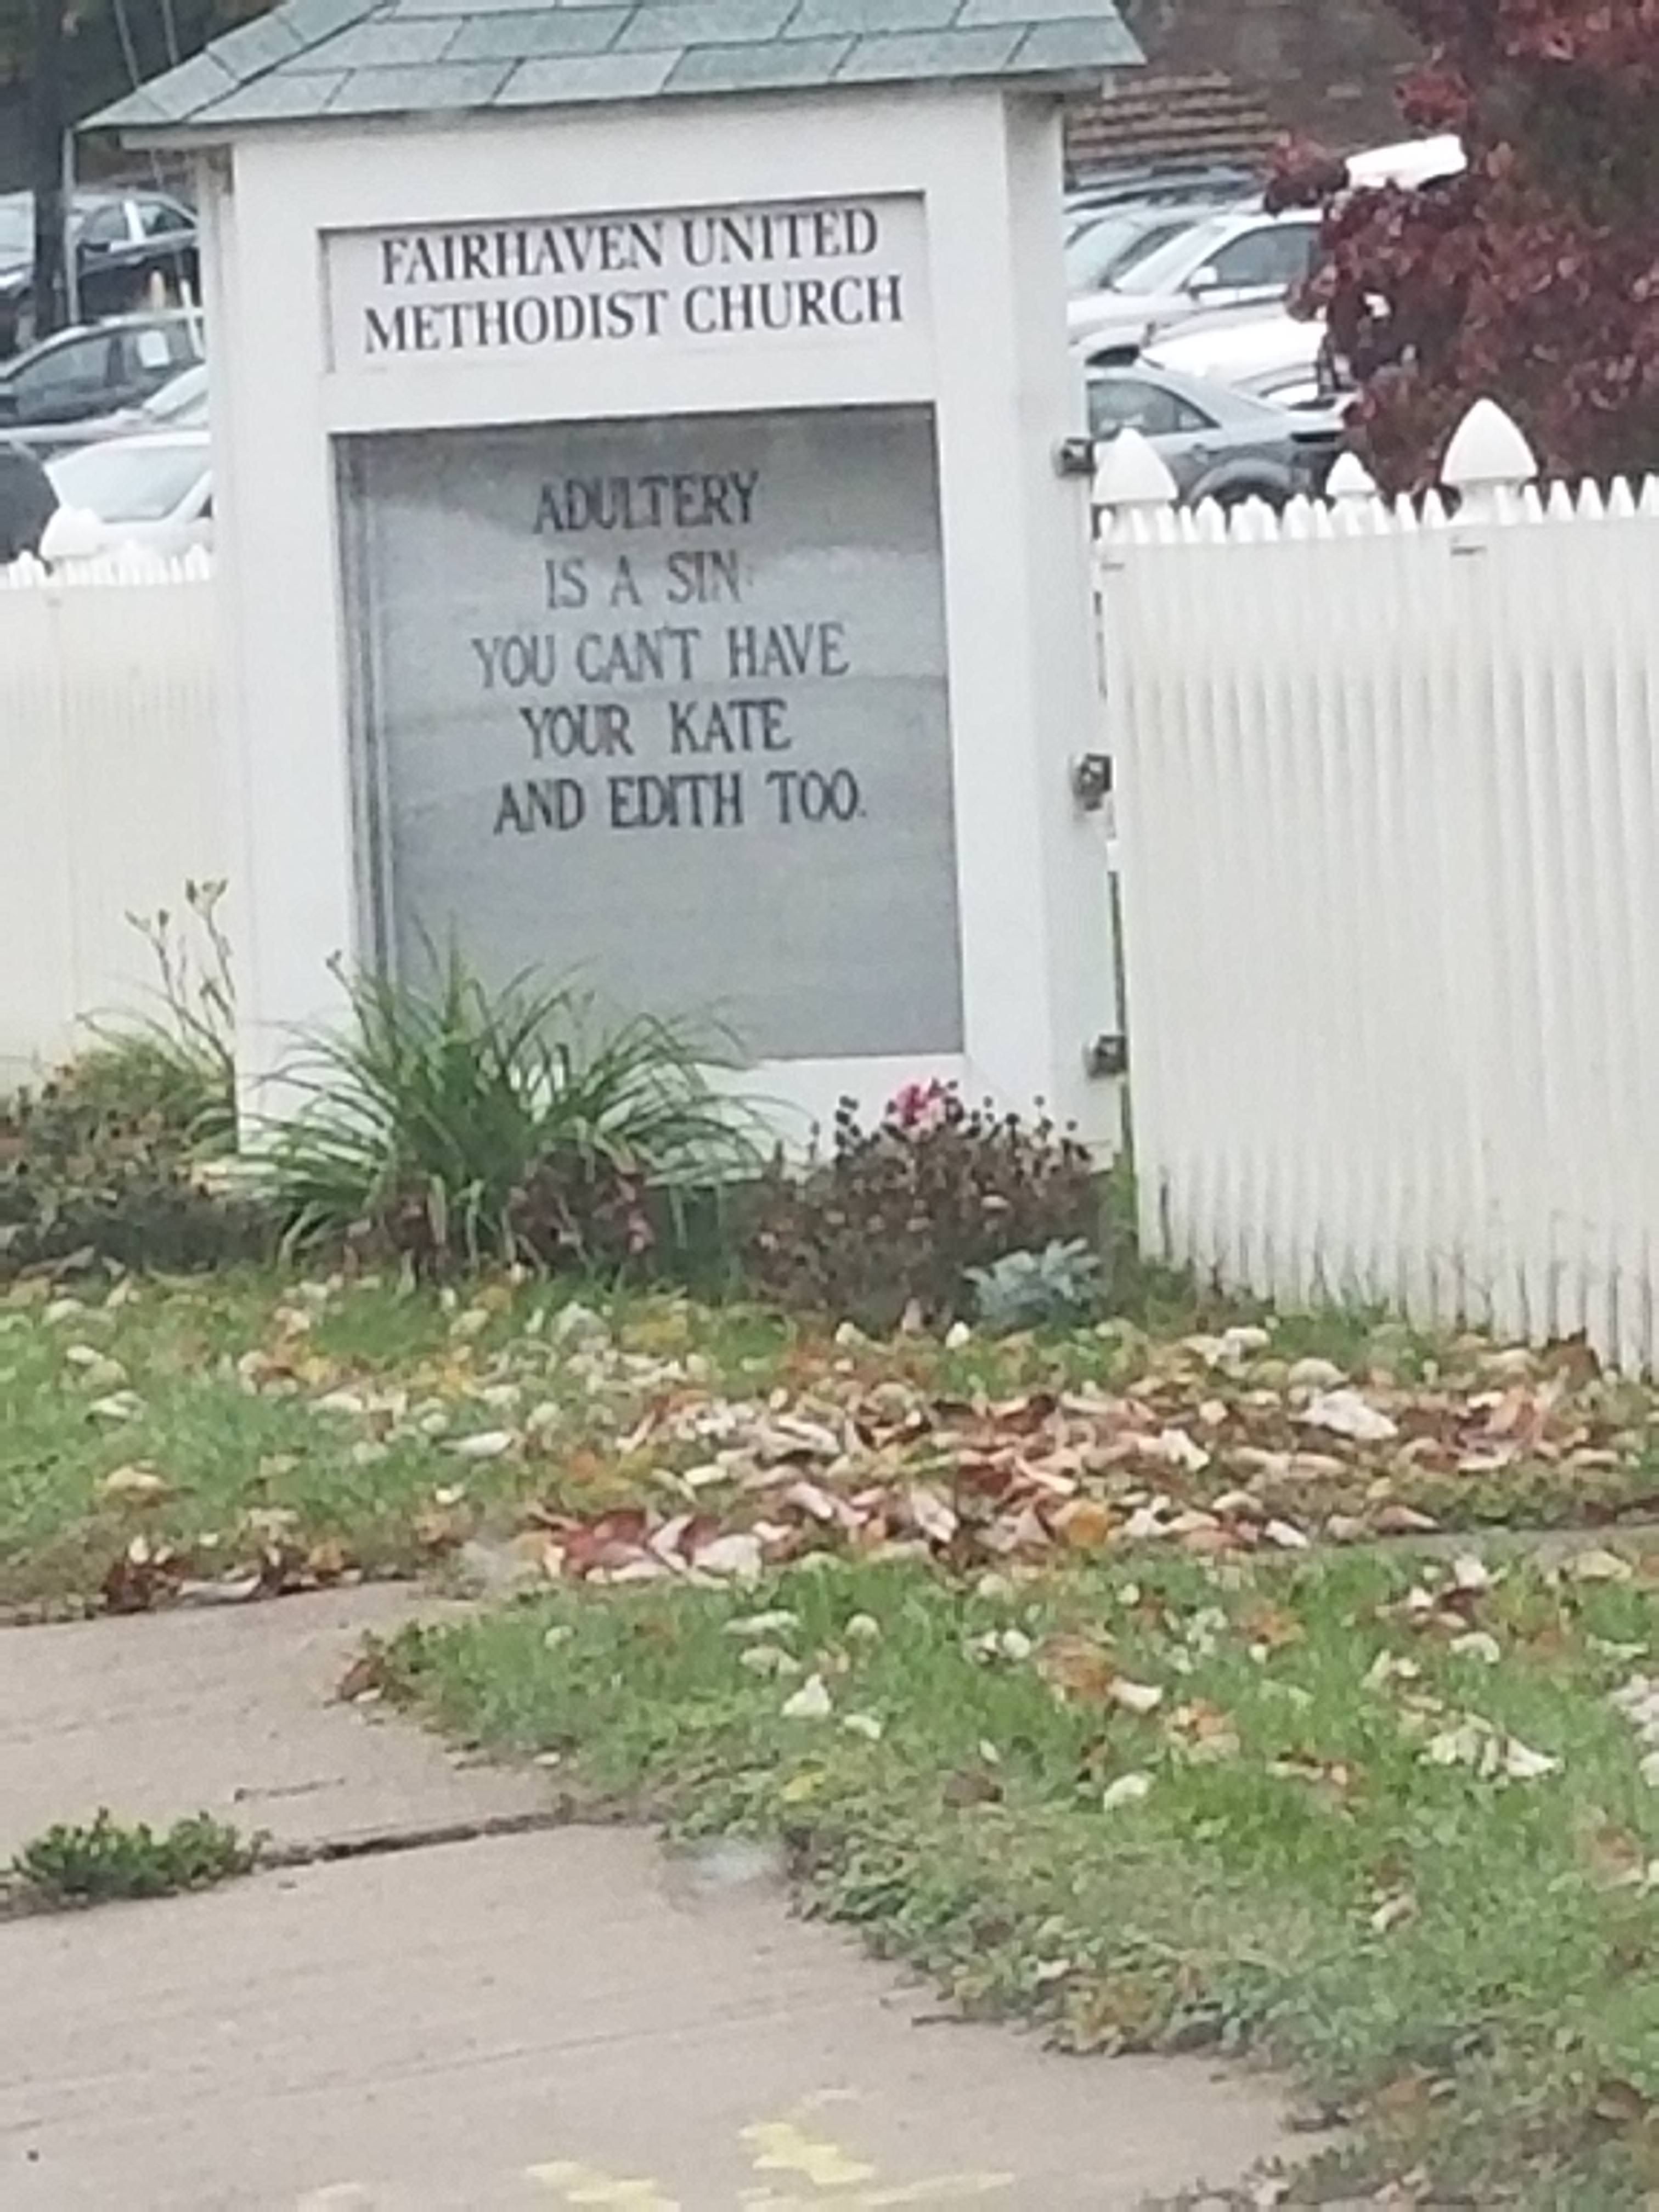 Well played United Methodist Church, well played...